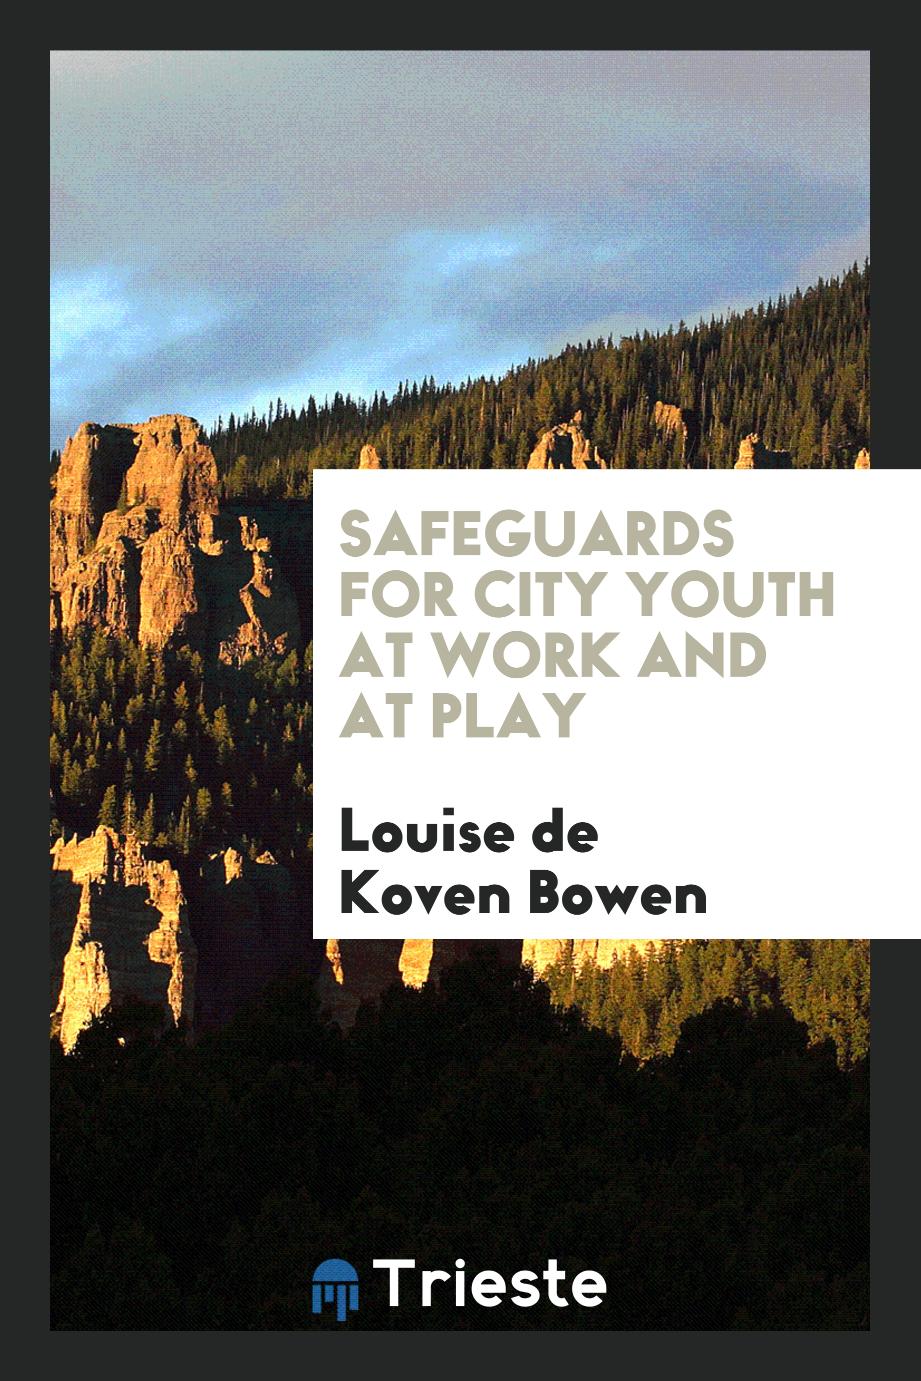 Safeguards for city youth at work and at play